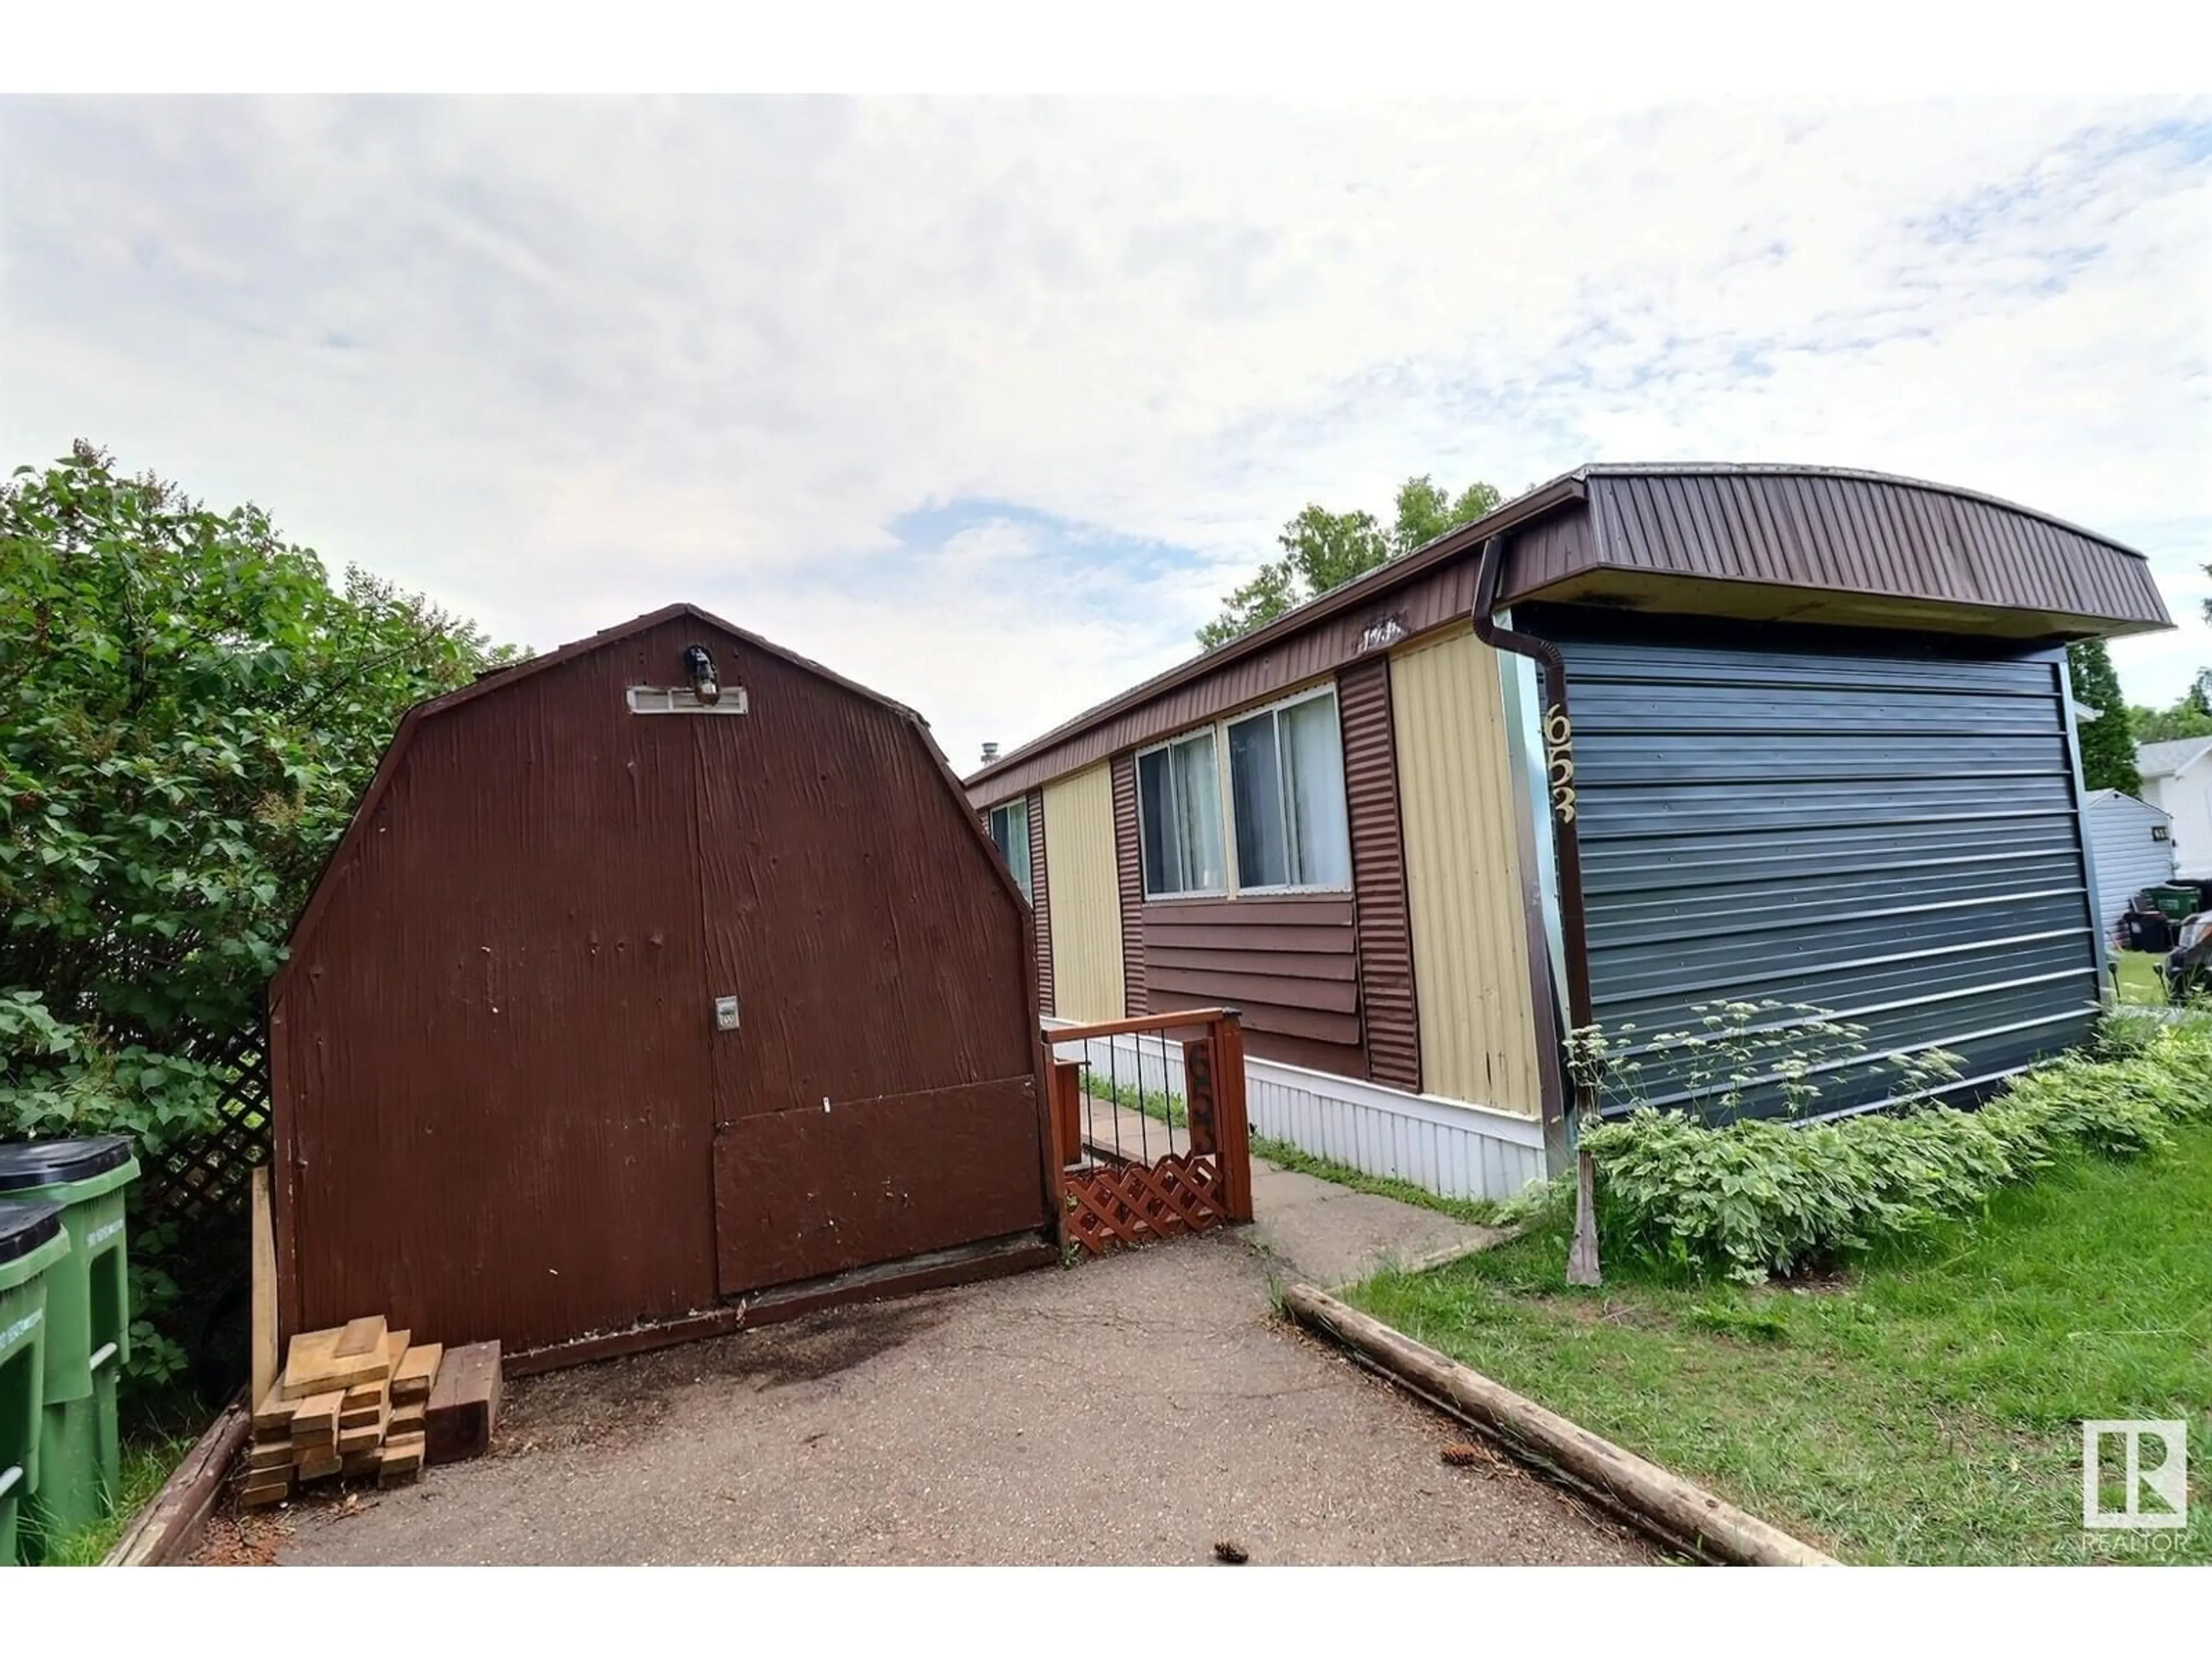 Shed for 653 Evergreen PA NW, Edmonton Alberta T5Y4M2